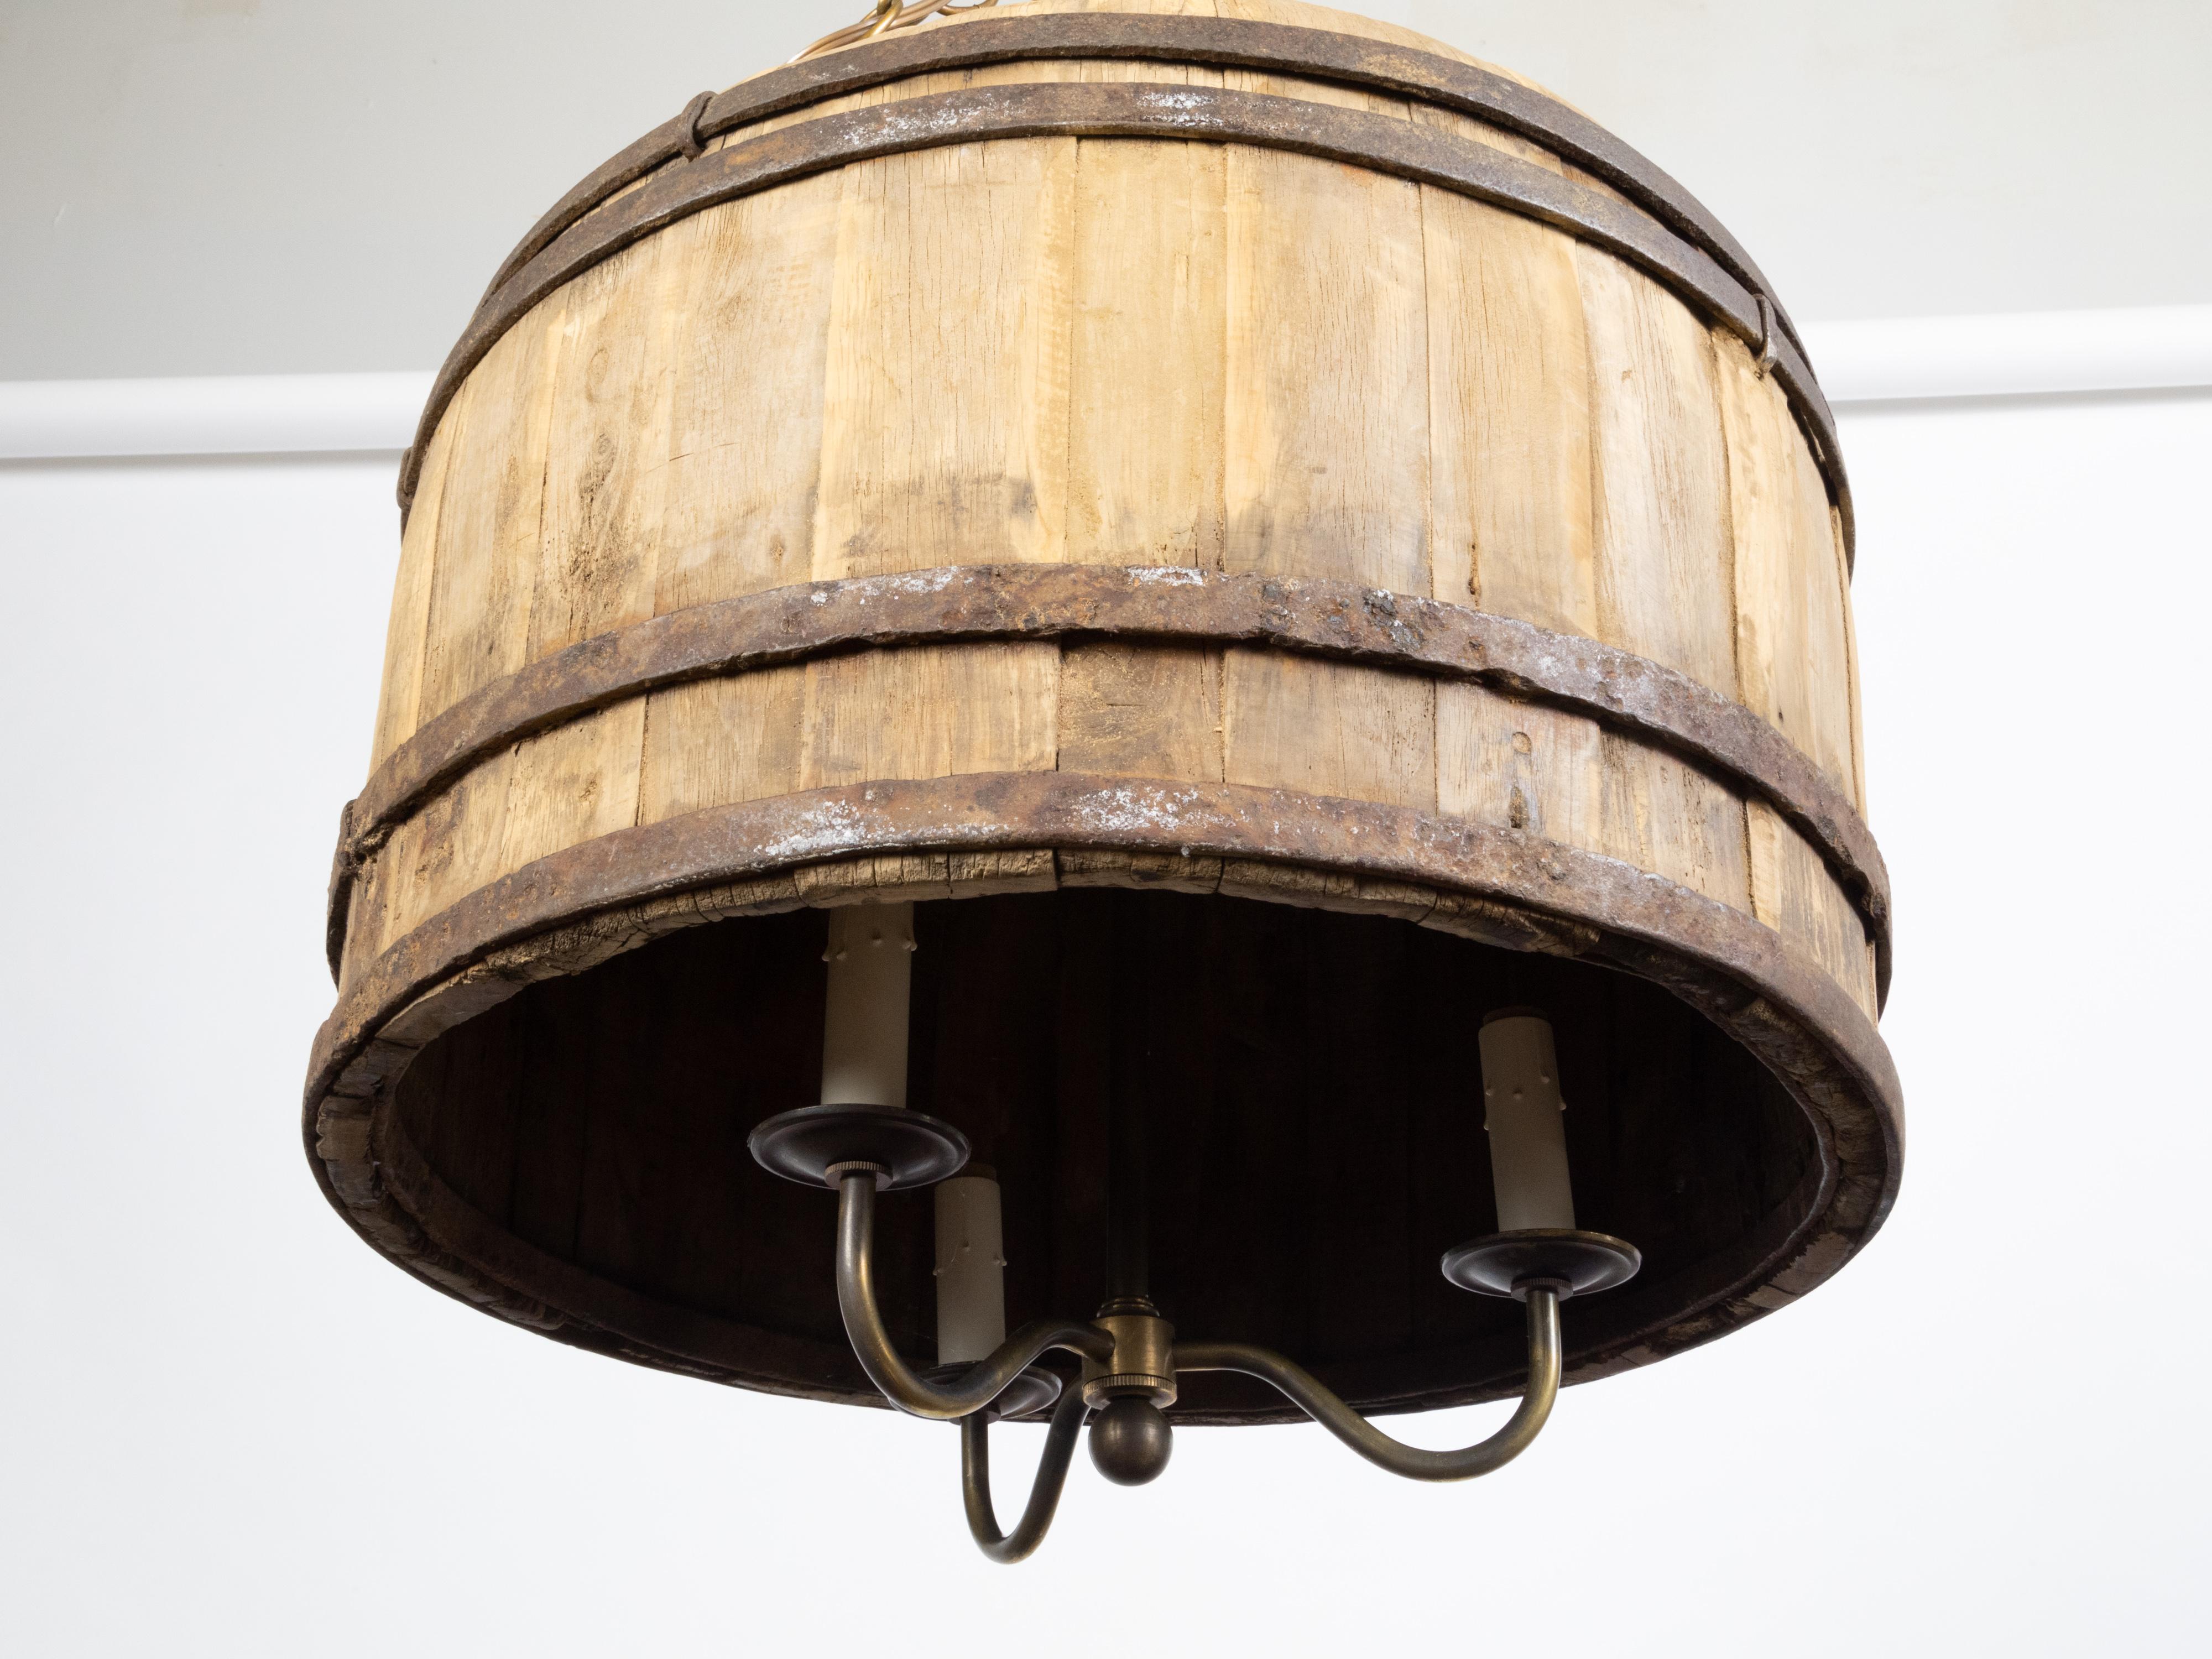 Rustic English Vintage Wooden Barrel Light Fixture with Three Scrolling Arms For Sale 5